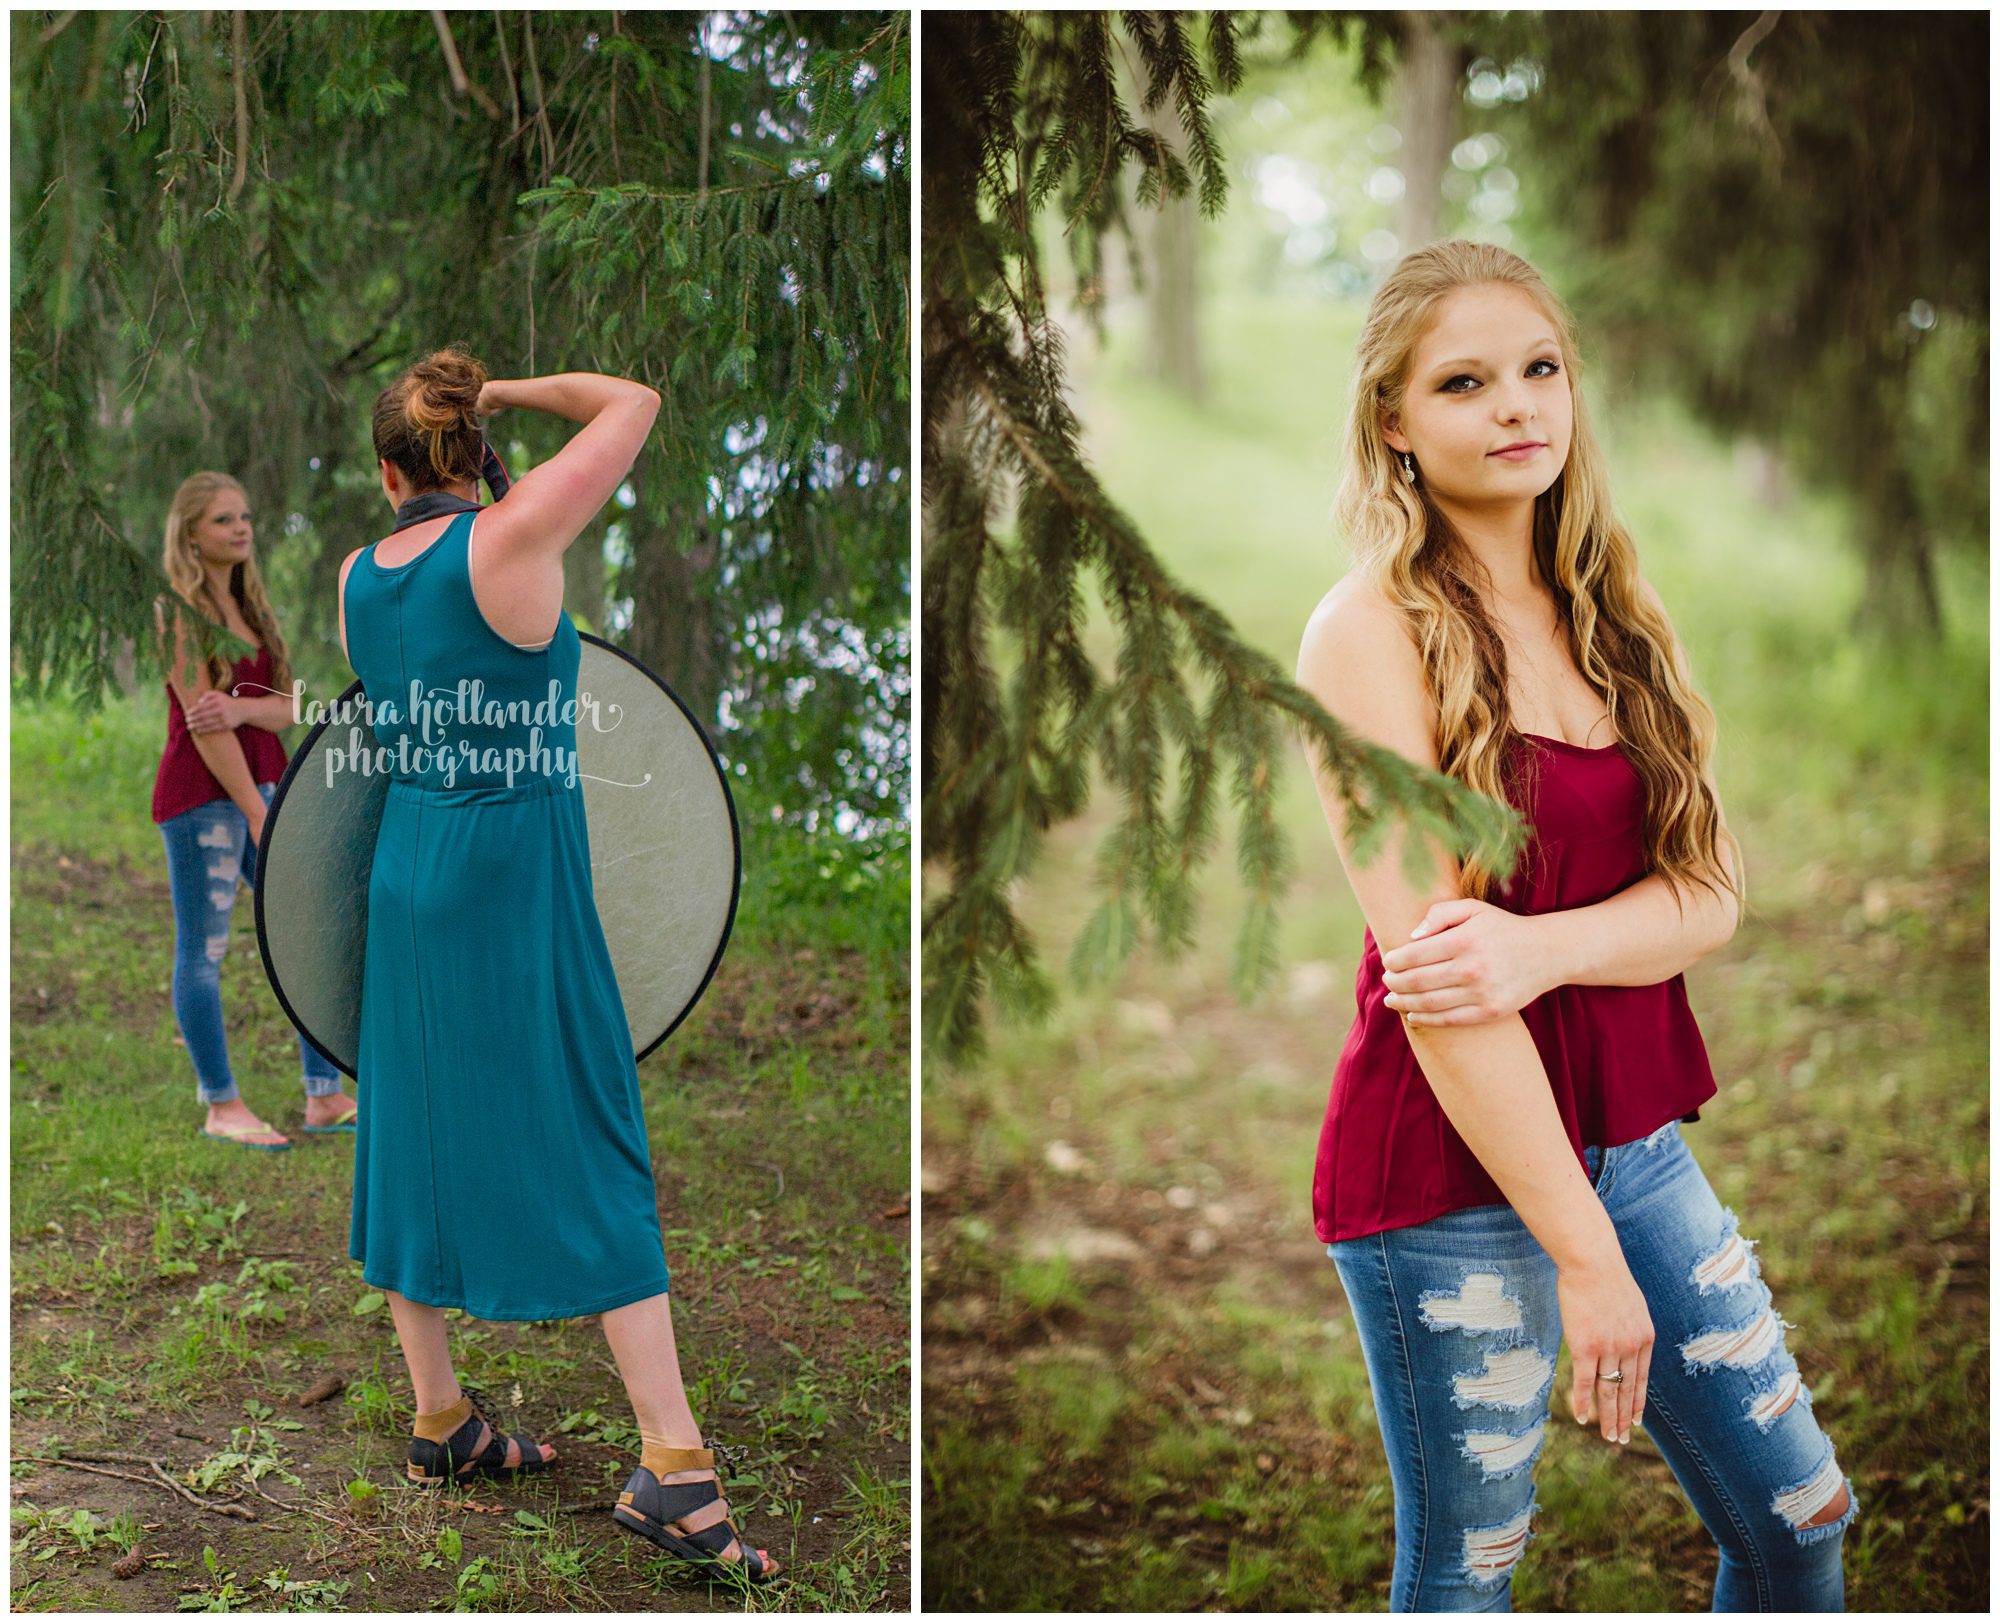 behind the scenes with Laura Hollander Photography. Senior girl, woodland backdrop